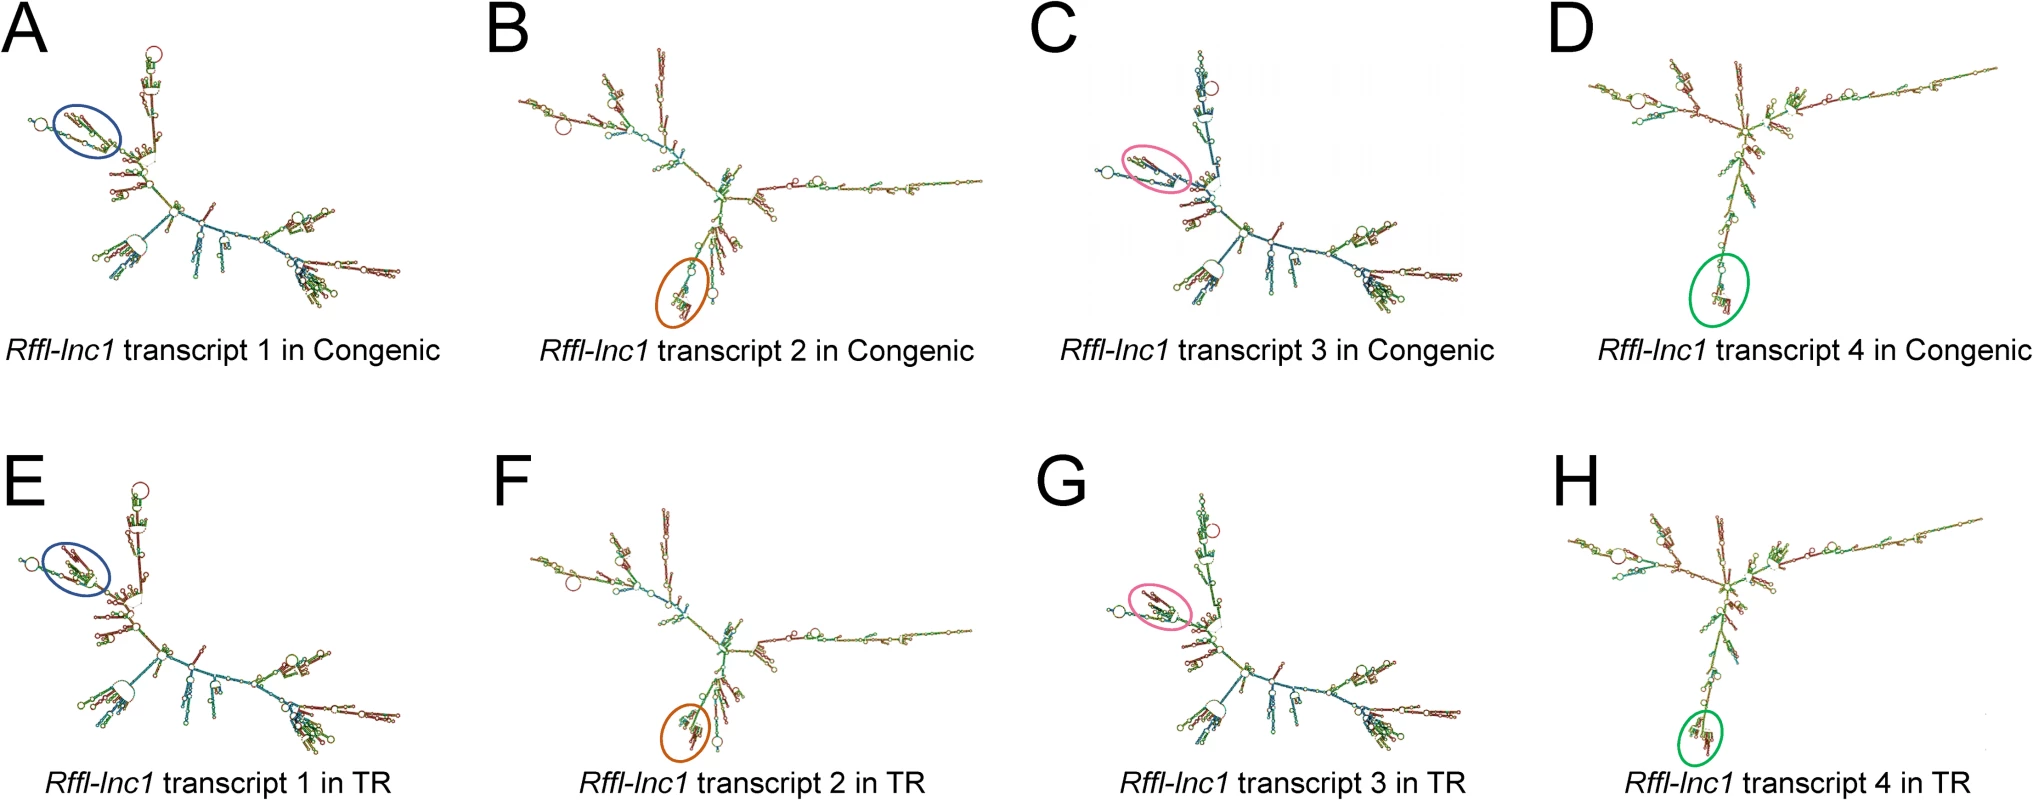 Bioinformatics prediction of <i>Rffl-lnc1</i> secondary structures in the S.LEW congenic rat and 19bp knock-in targeted rescue (TR) model.